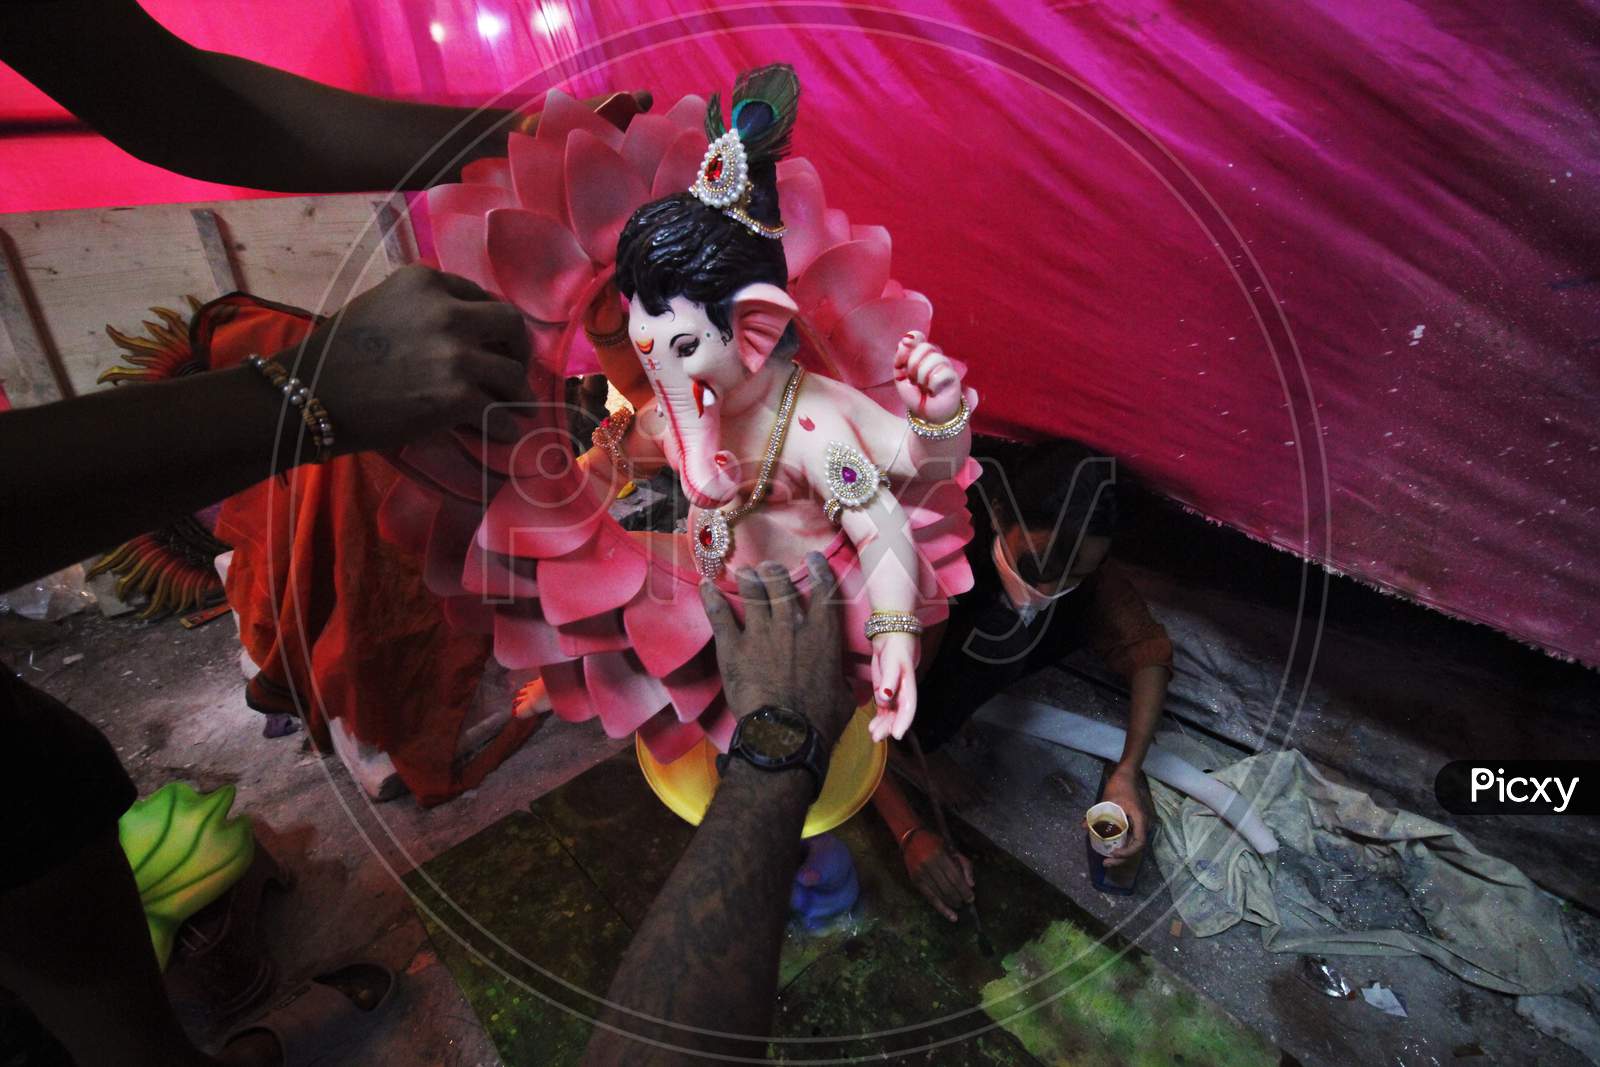 People set up the idol of Hindu God Ganesh, the deity of prosperity and a woman paints the base on which the ganpati is kept, before the start of the Ganesh Chaturthi festival in Mumbai, India on August 21, 2020.